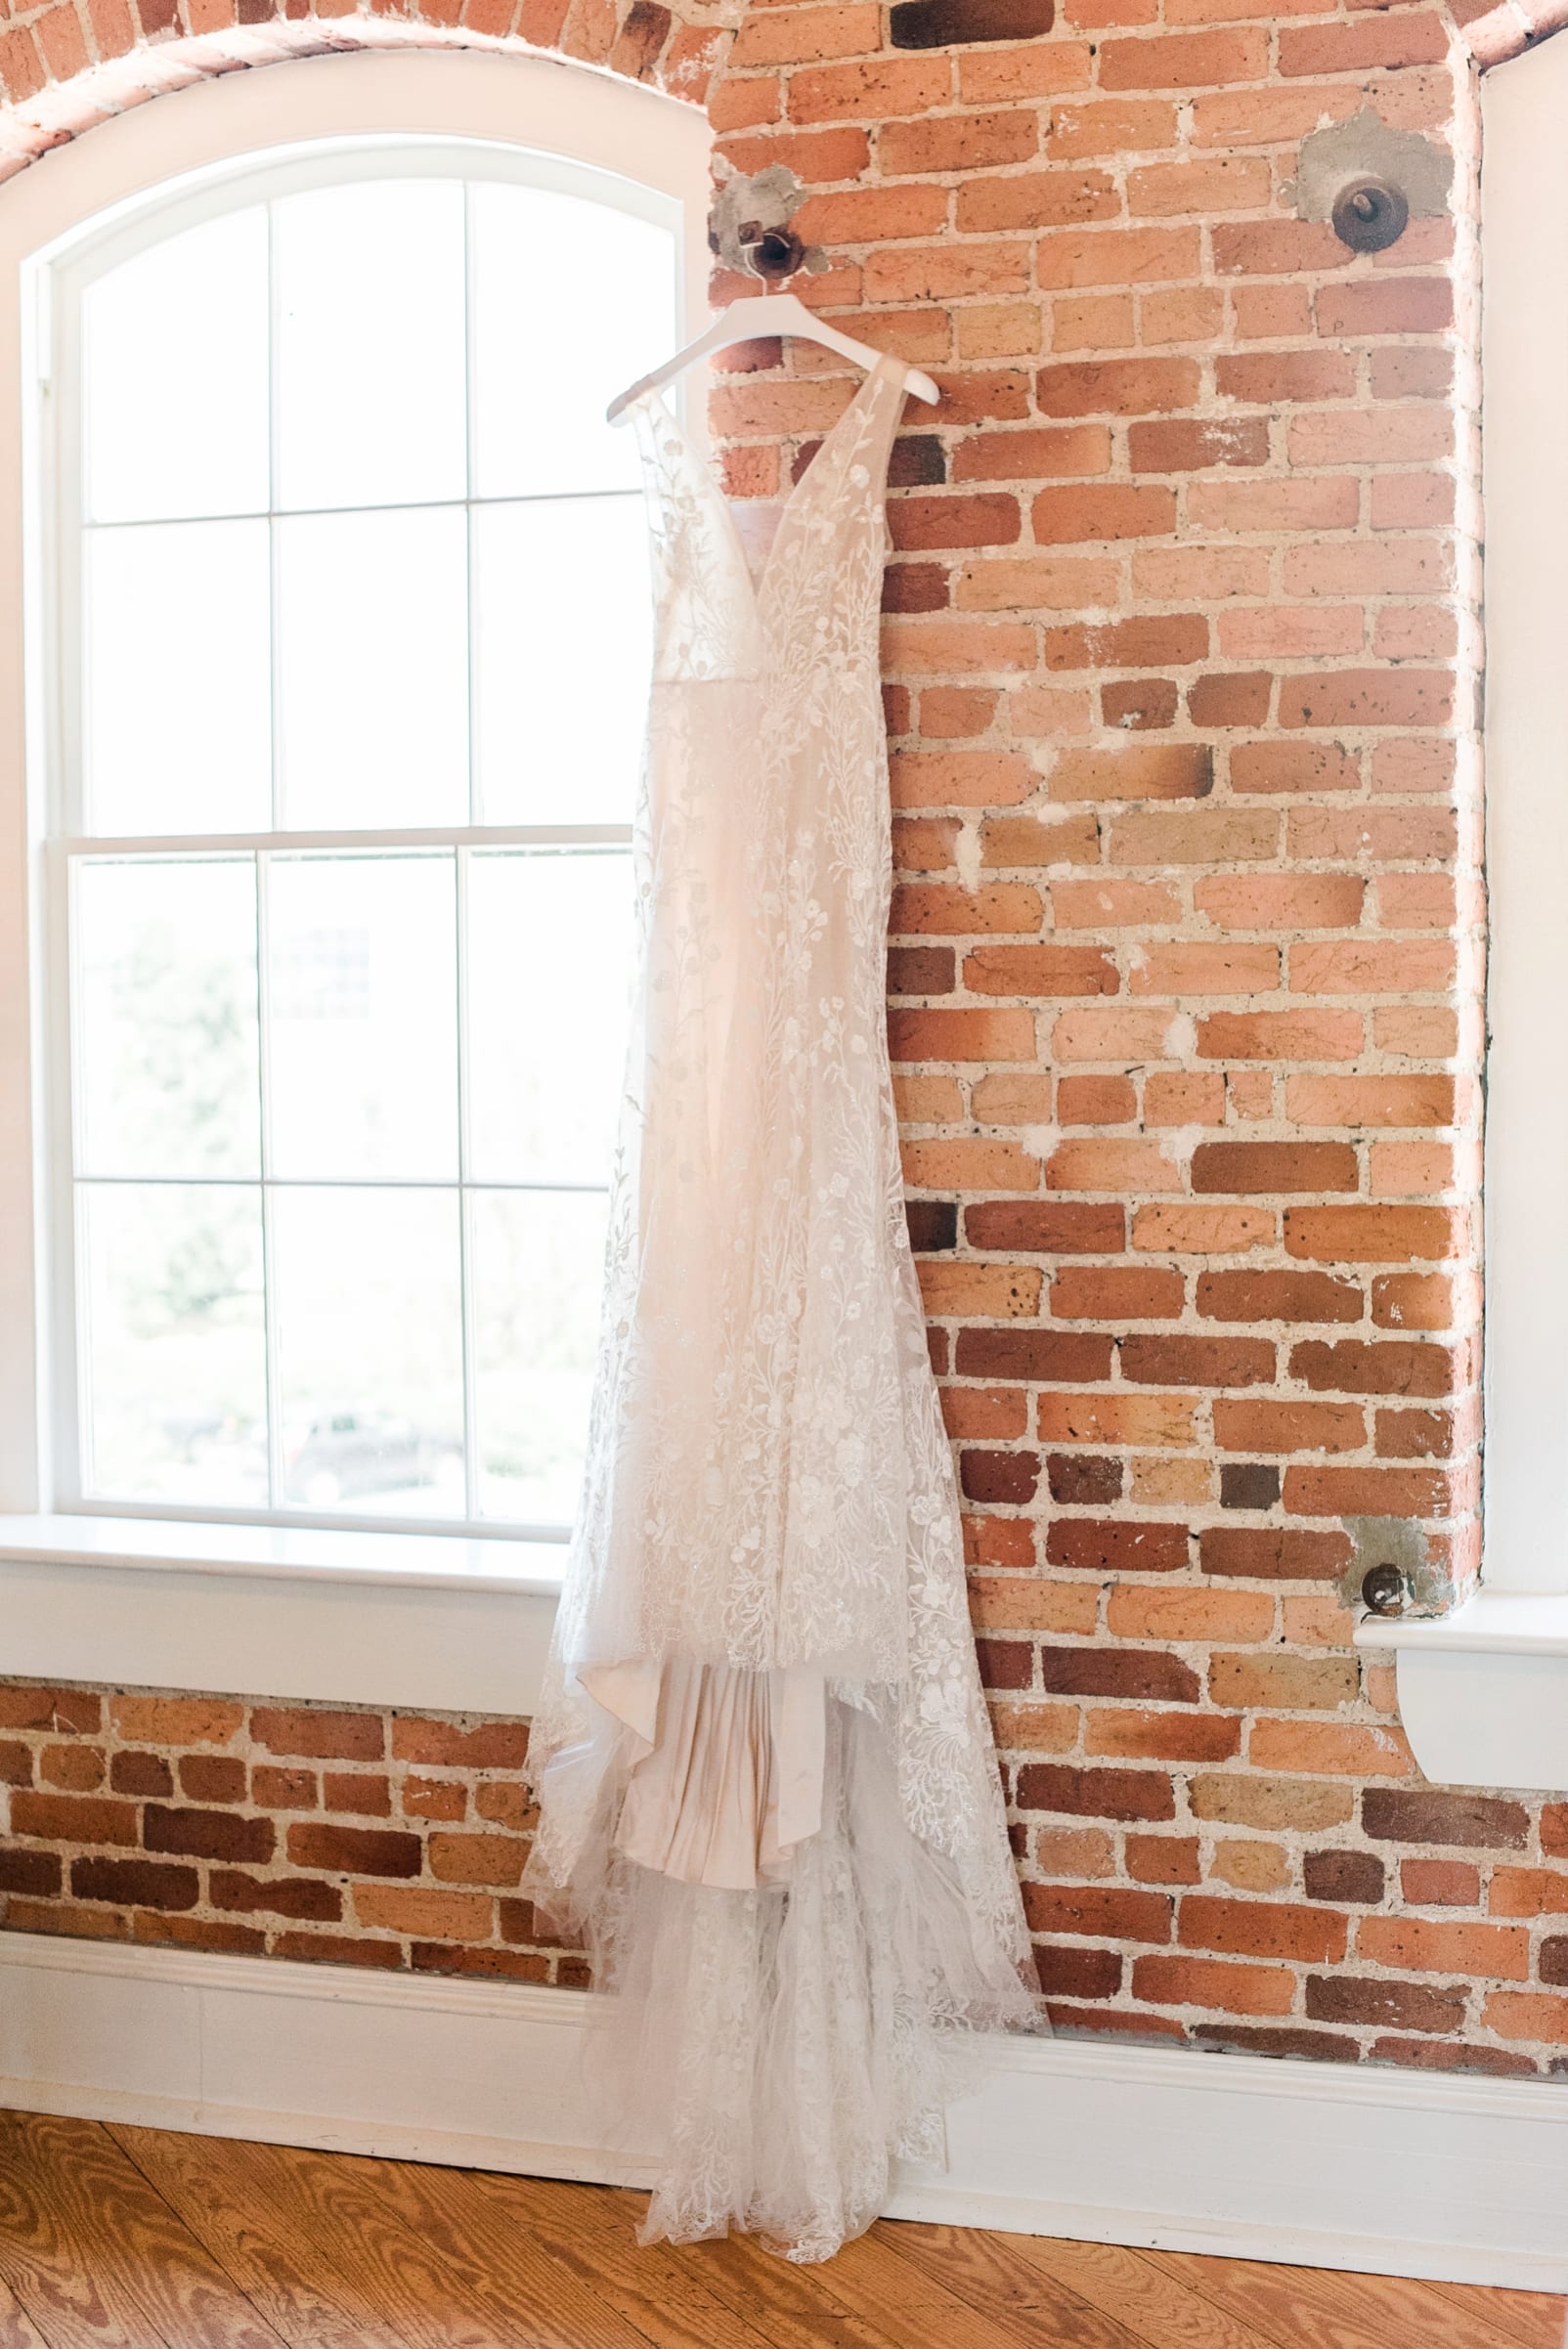 Monique Lhuillier wedding dressing from Alexia's styled on exposed red brick wall photo